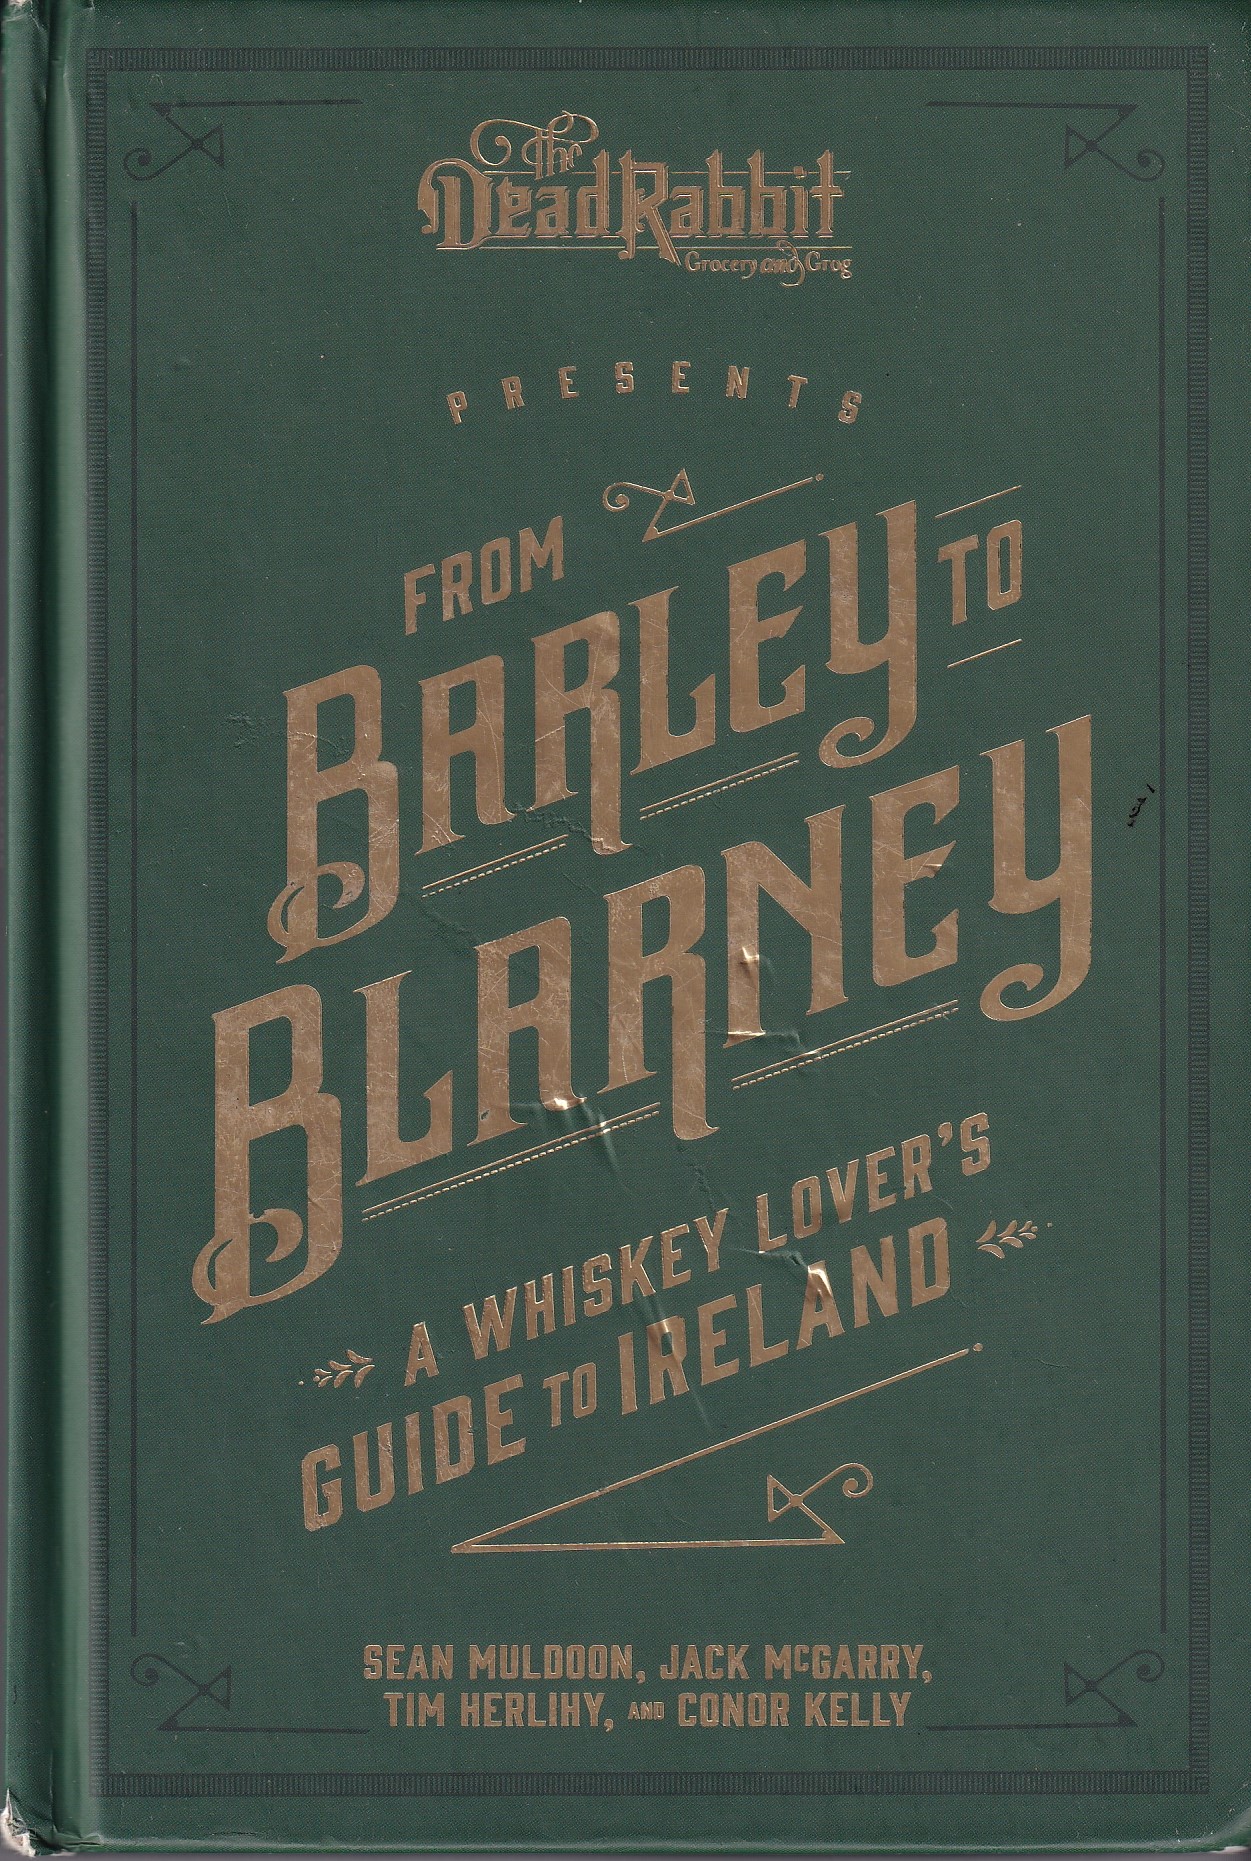 From Barley to Blarney: A Whiskey Lover’s Guide to Ireland by Sean Muldoon, Jack McGarry, Tim Herlihy